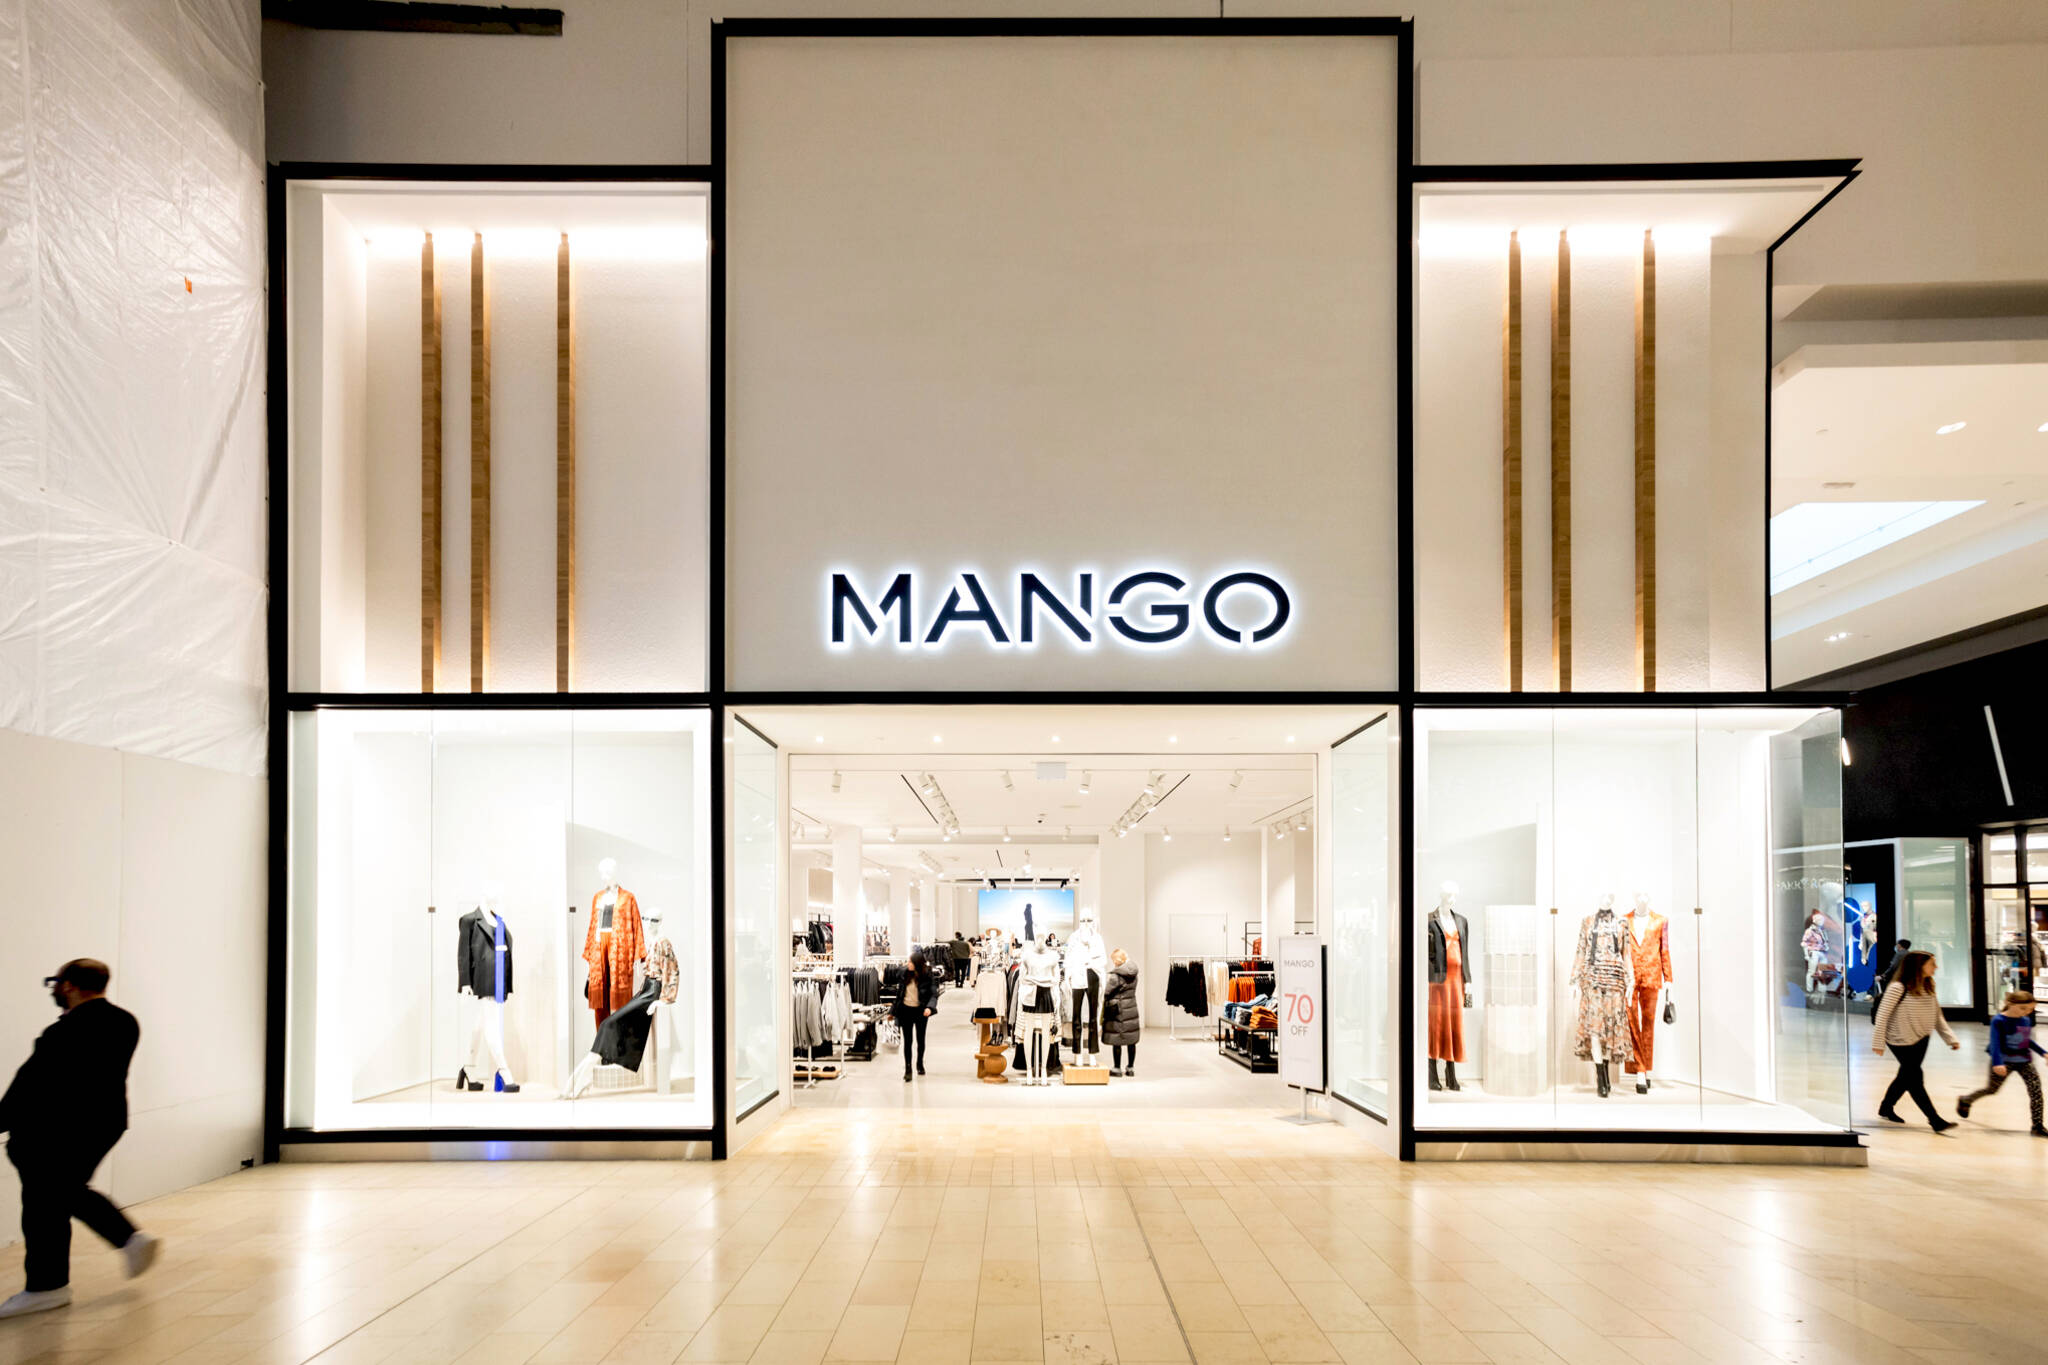 Mango just opened its first Canadian store in Toronto and here's what it looks like